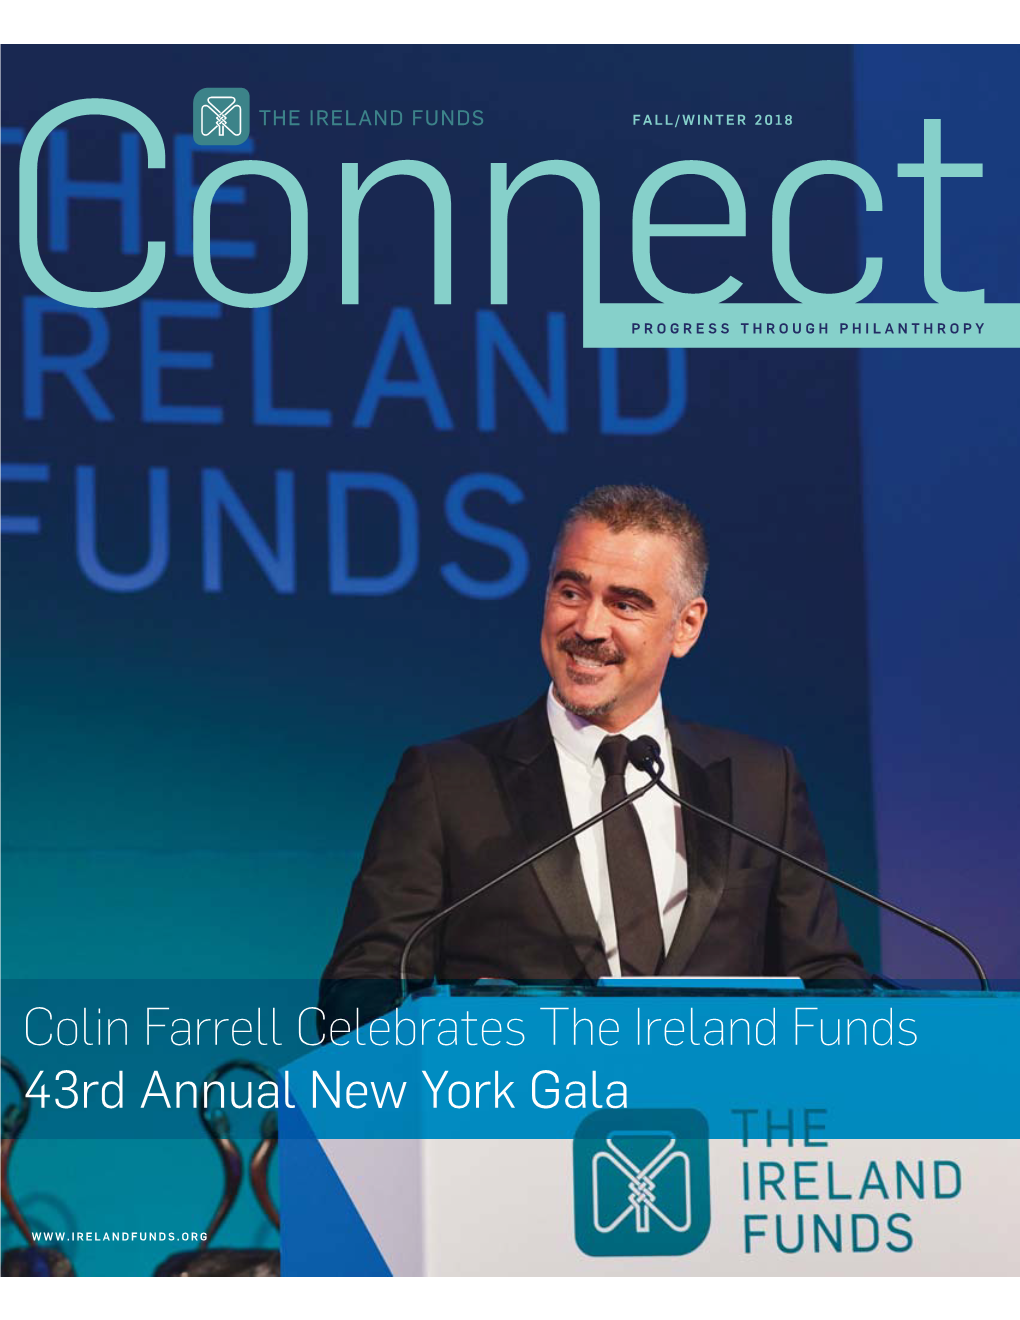 Colin Farrell Celebrates the Ireland Funds 43Rd Annual New York Gala